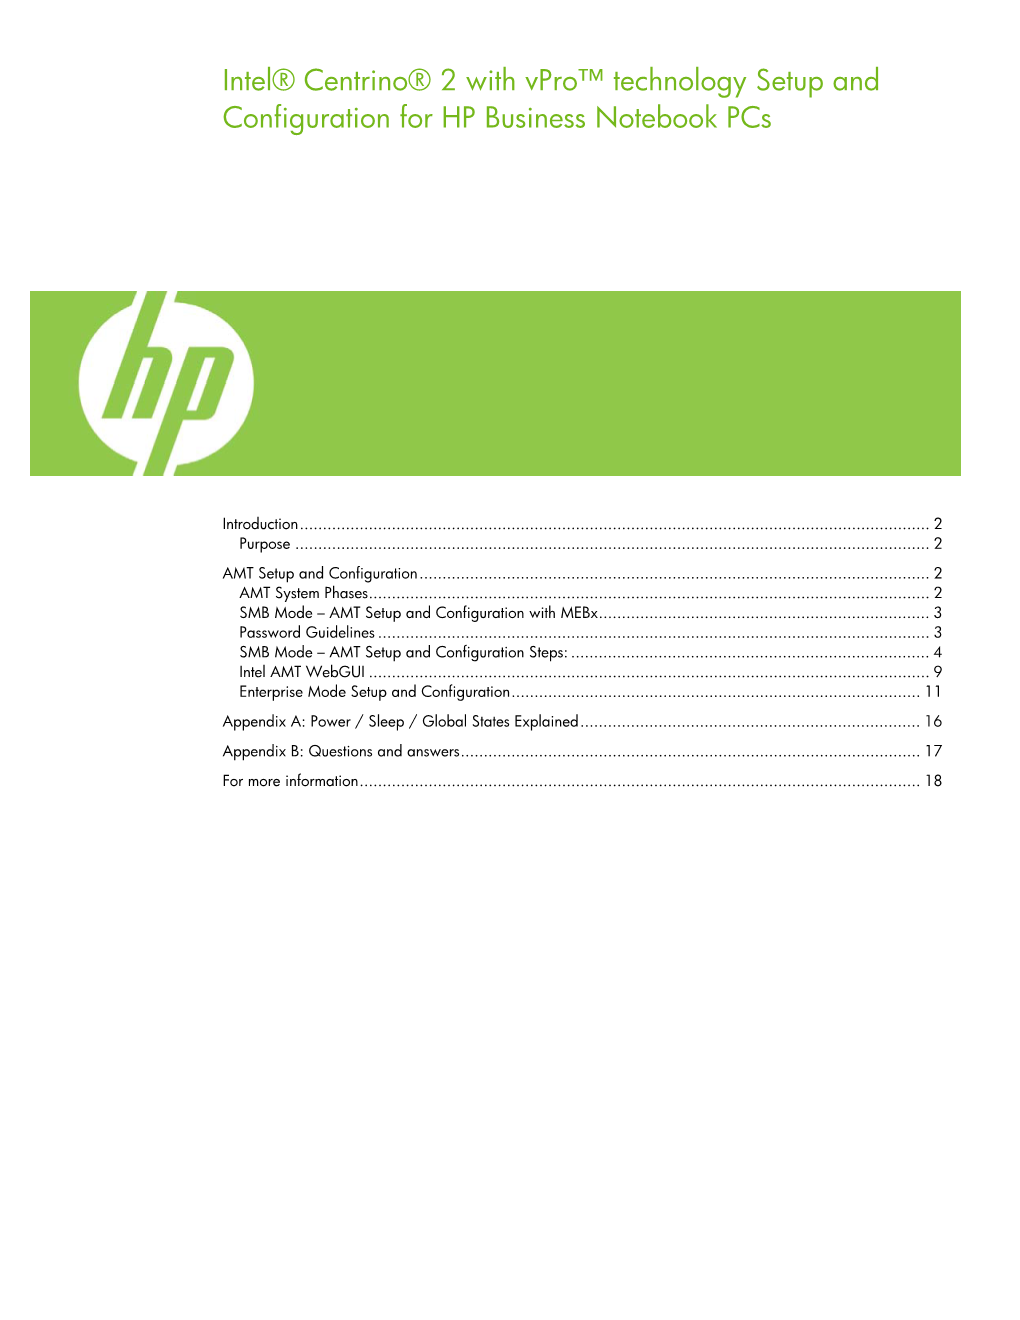 Intel® Centrino® 2 with Vpro™ Technology Setup and Configuration for HP Business Notebook Pcs